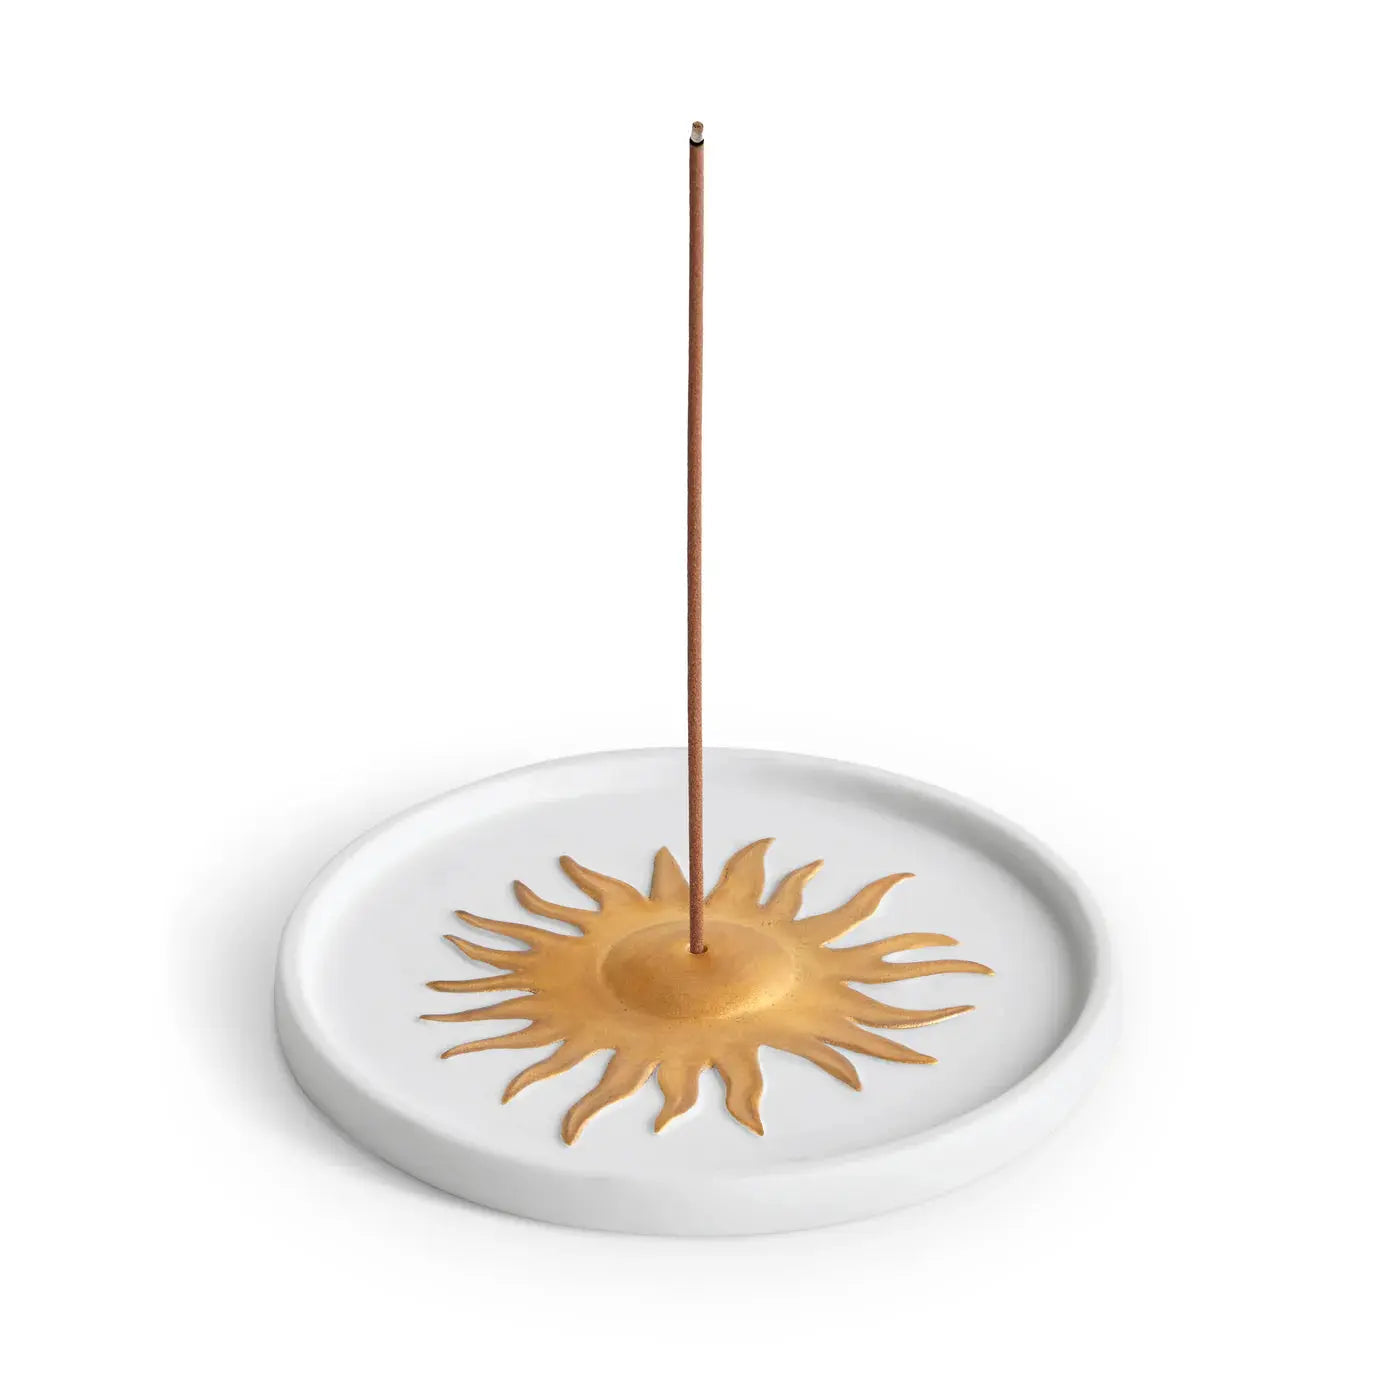 The object Soleil incense holder